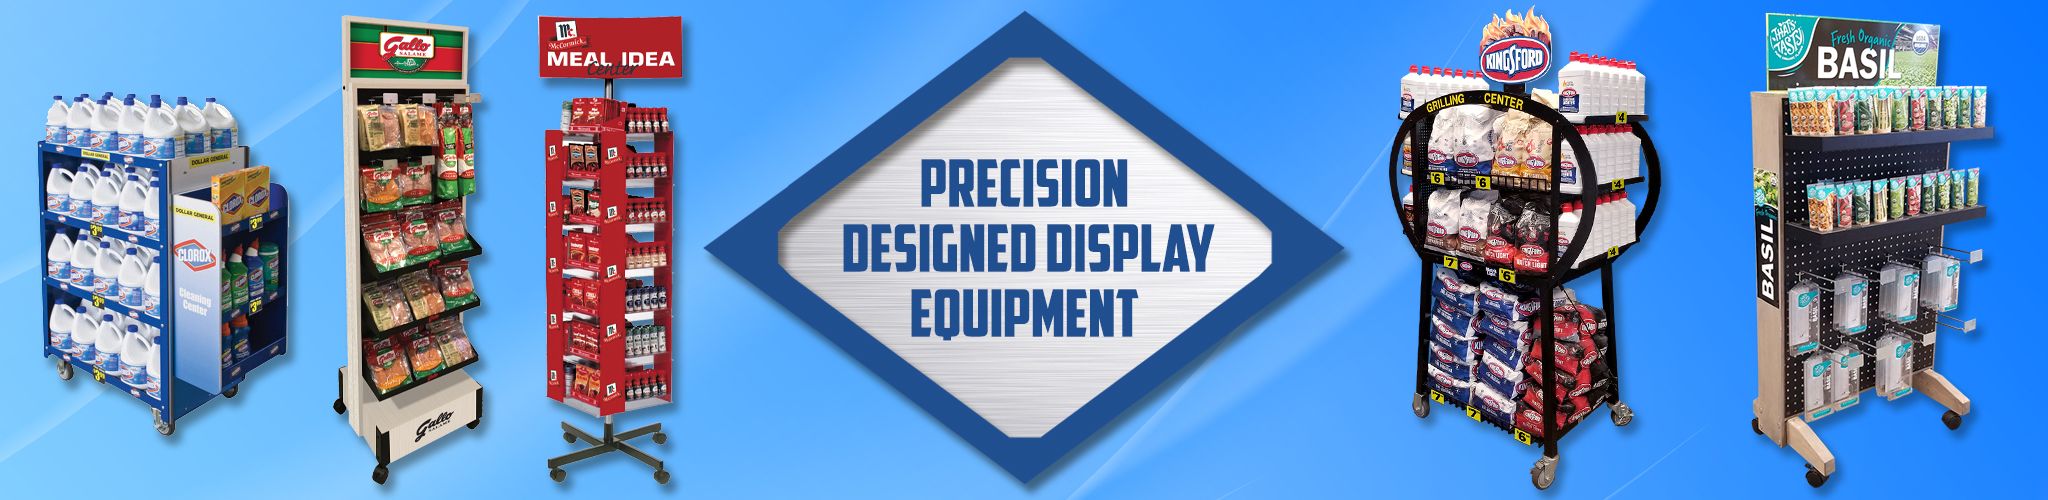 Precision Designed Display Equipment by Intermarket Technology